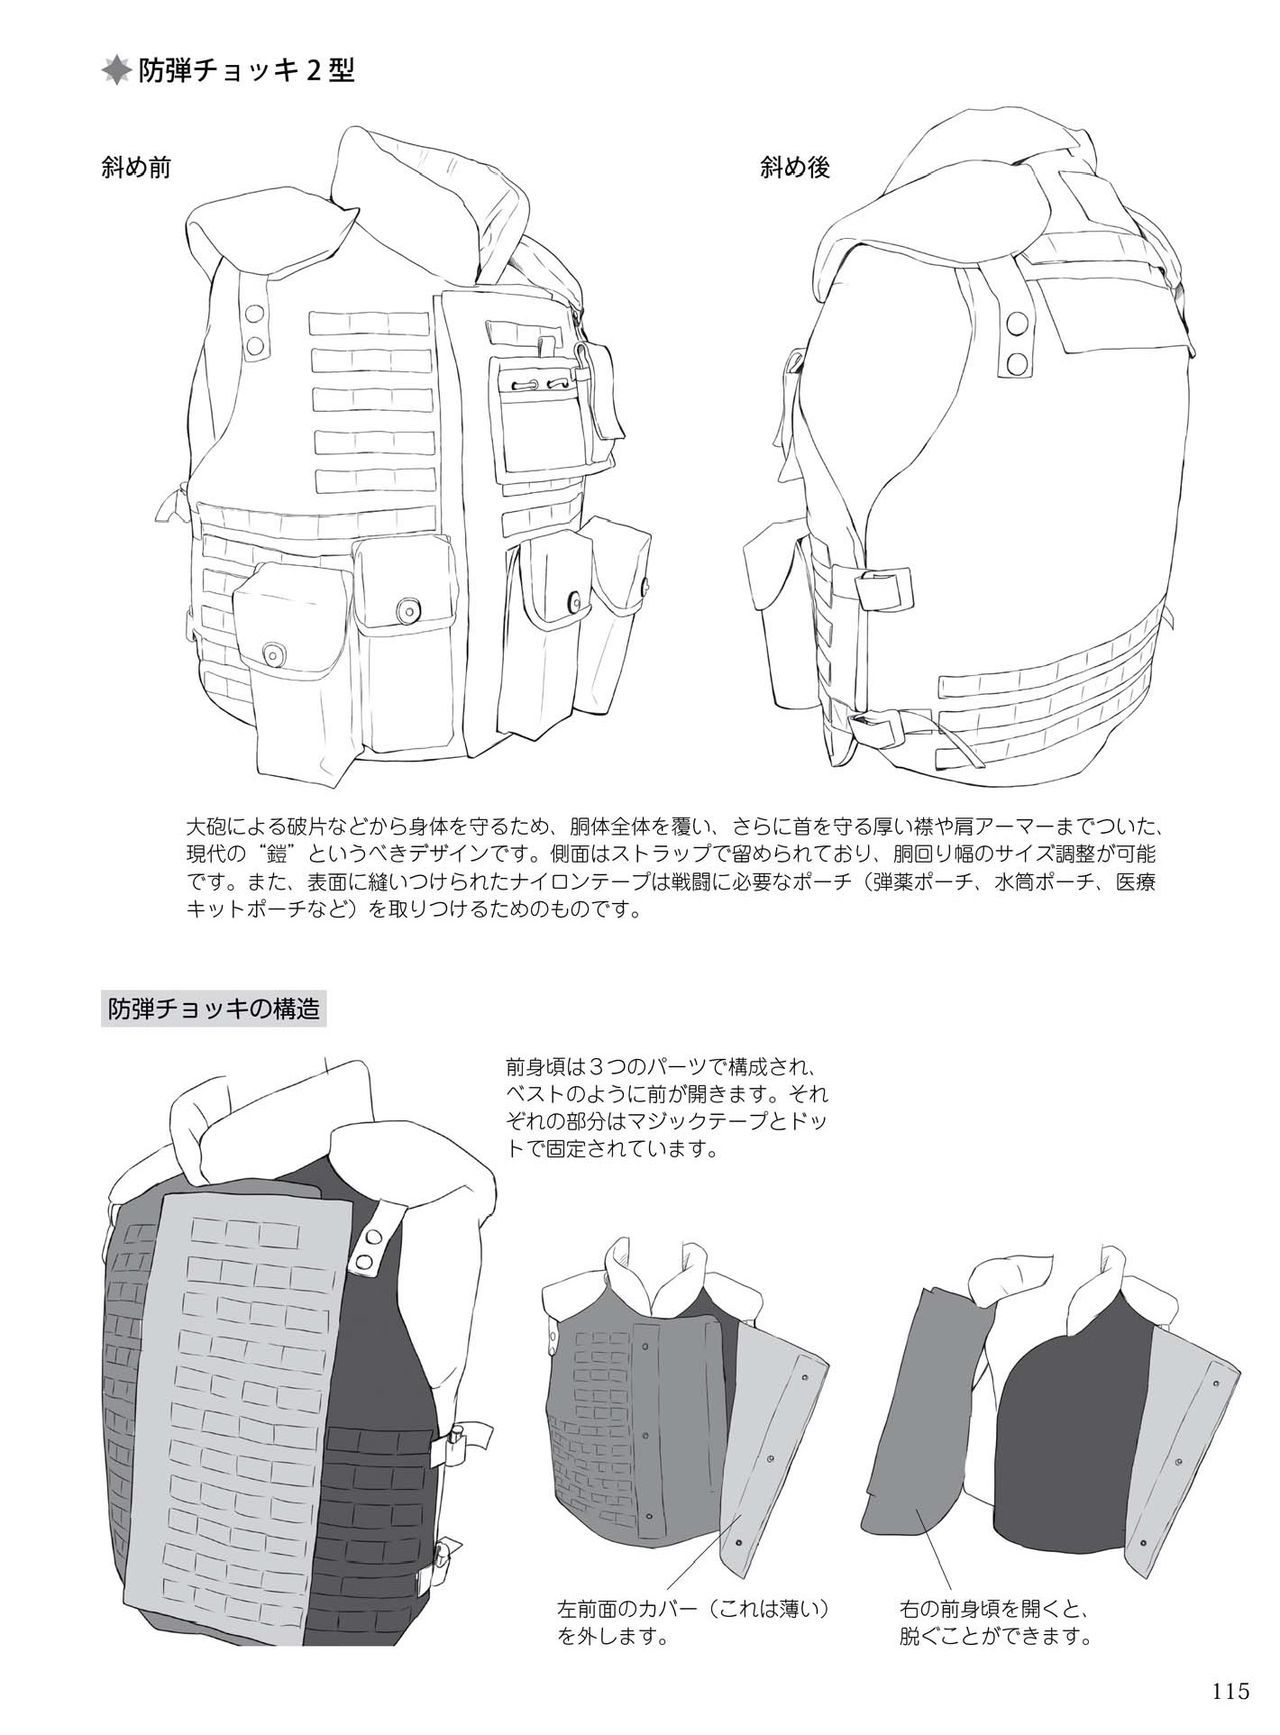 How to draw military uniforms and uniforms From Self-Defense Forces 軍服・制服の描き方 アメリカ軍・自衛隊の制服から戦闘服まで 118